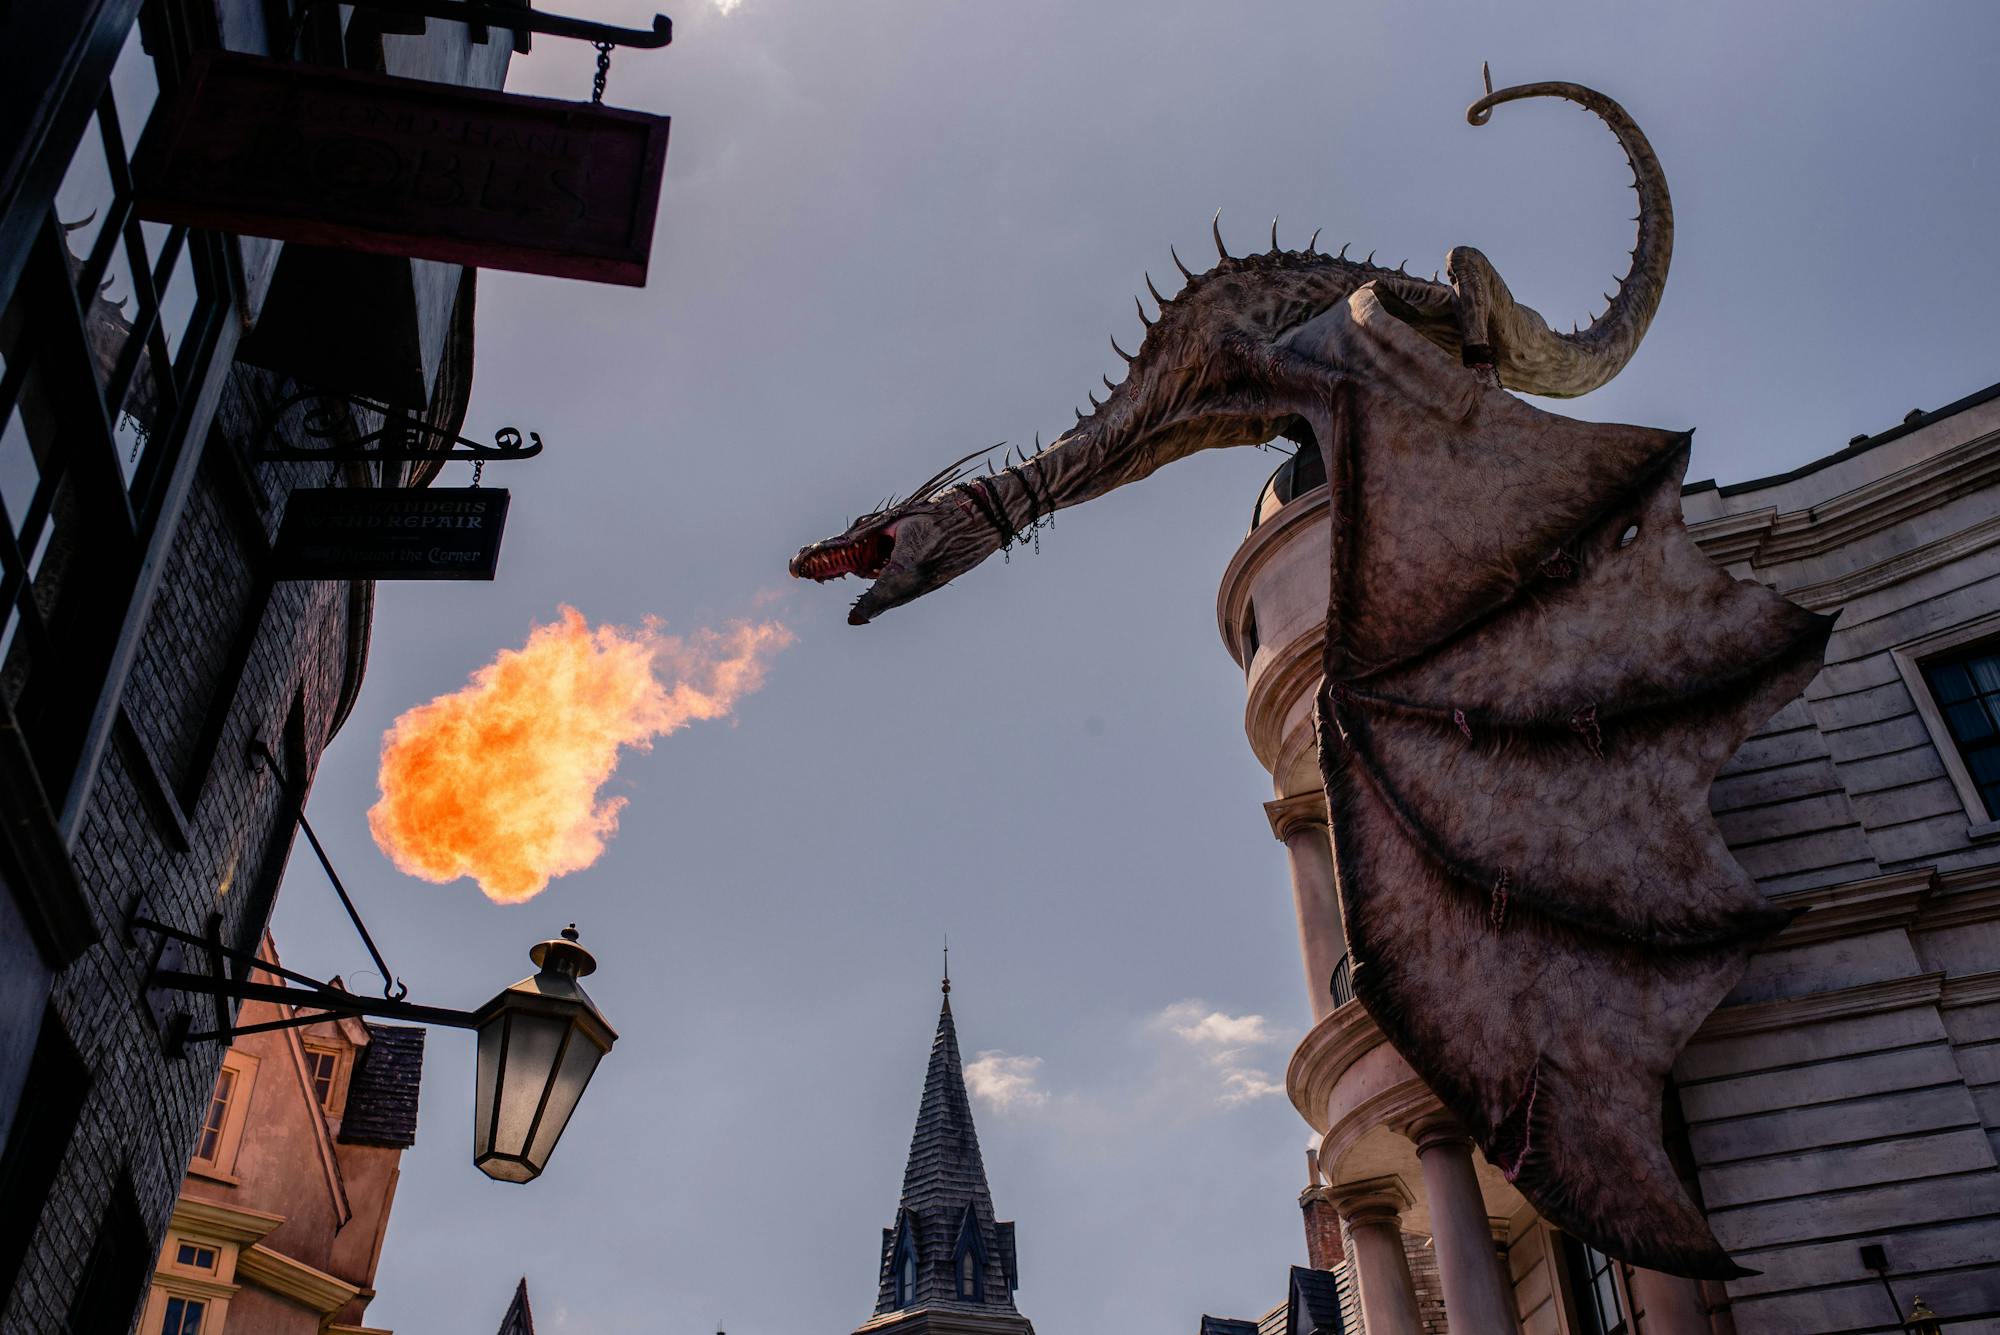 A dragon is spitting fire in the Wizarding World of Harry Potter in Universal Studios in L.A. 